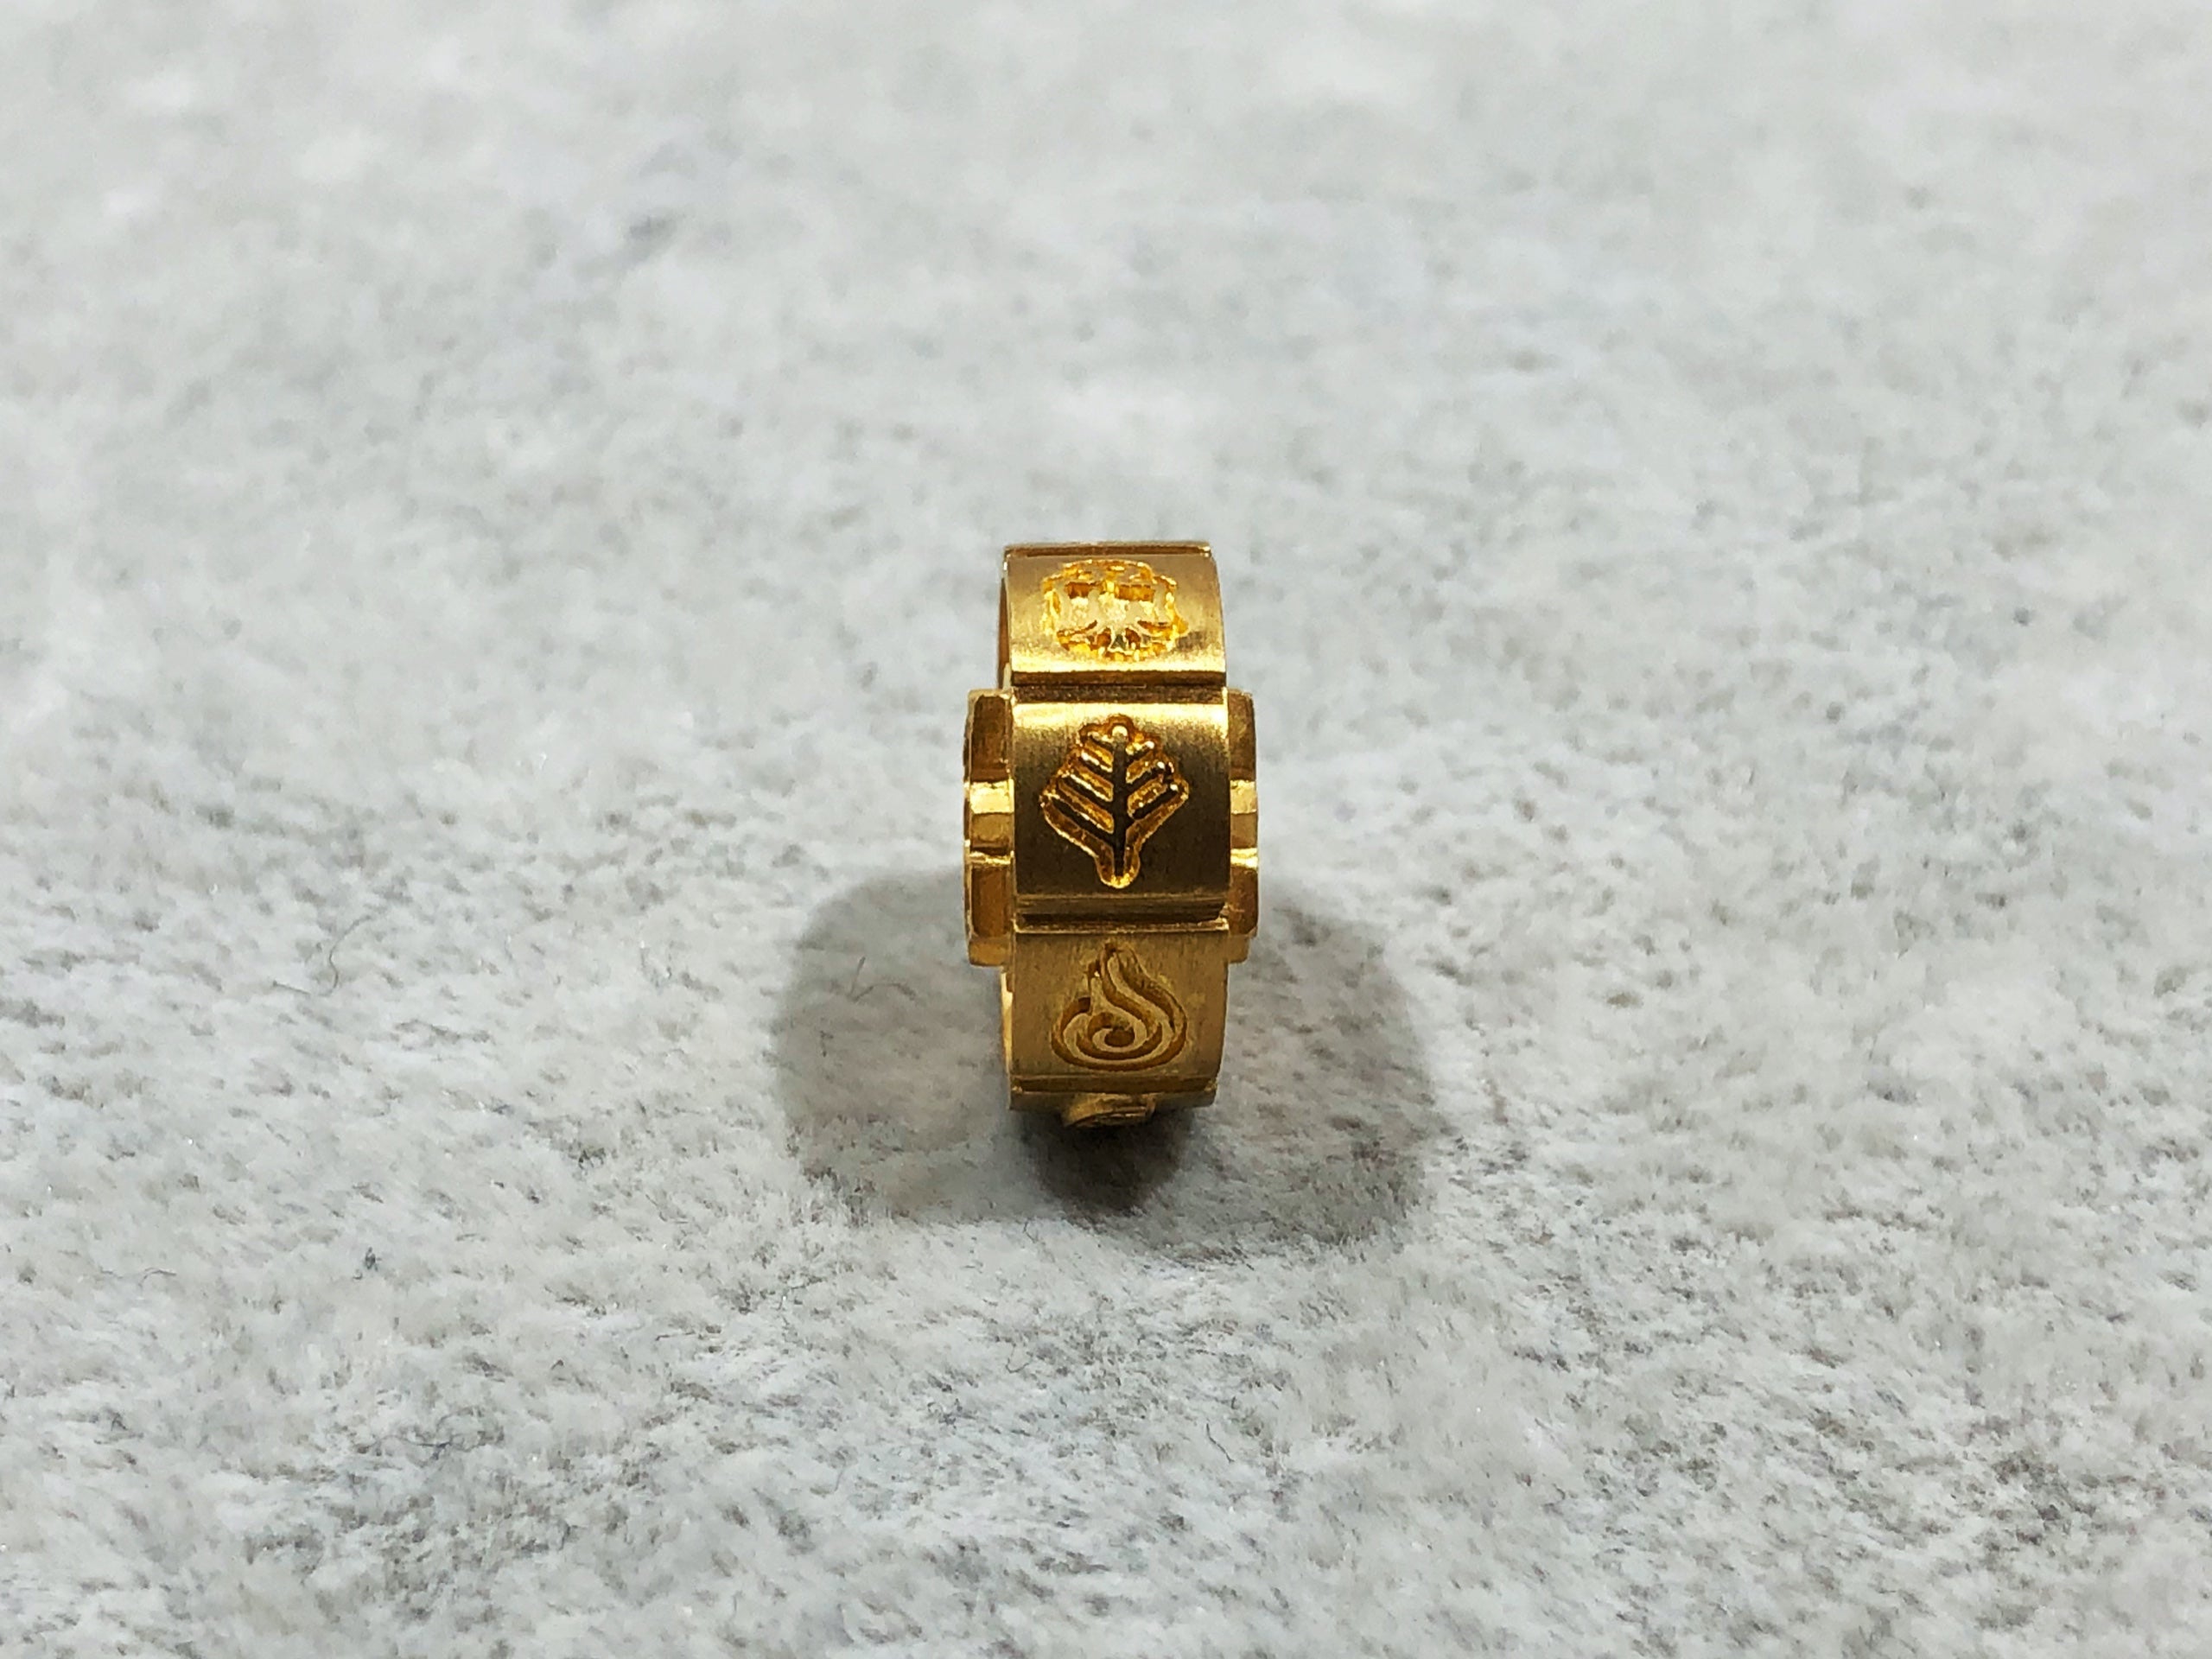 Cheers to great fortune in 2021 Lunisolar Five Phases Prayer Bead, 24K gold - 2021新年吉祥 日月五行平安珠 24K金款